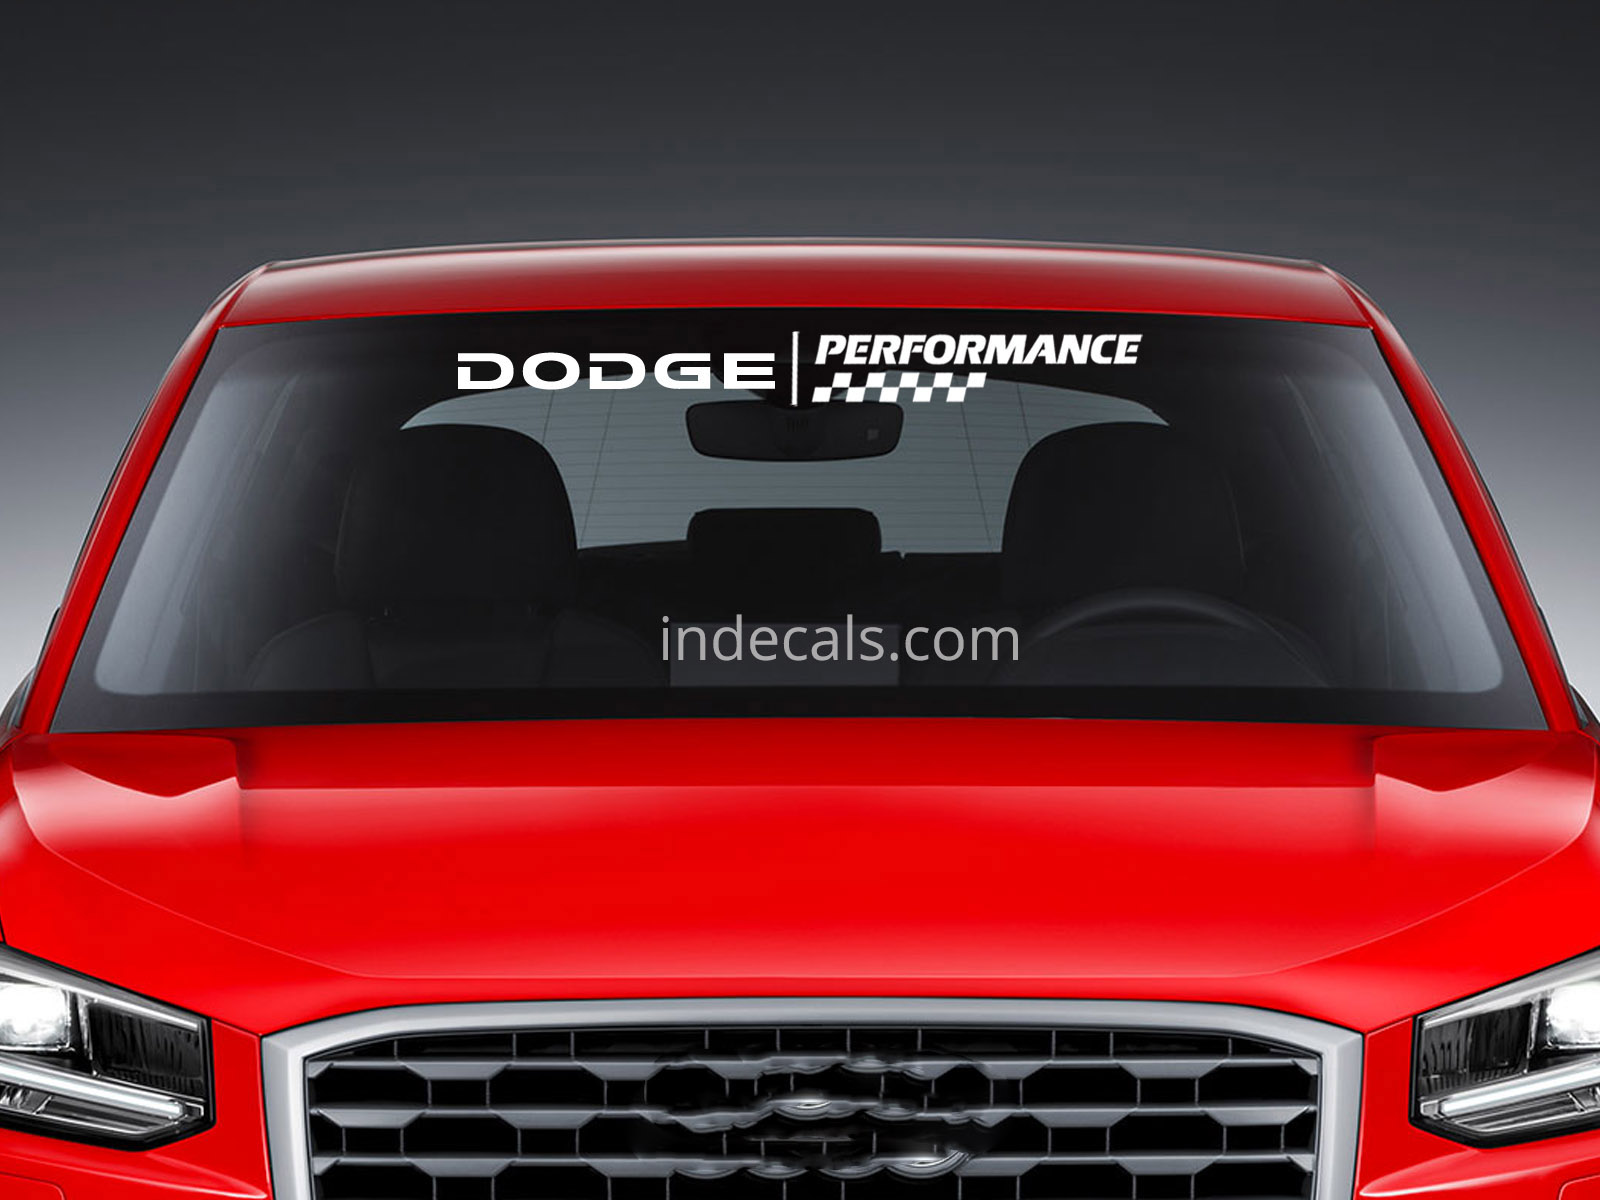 1 x Dodge Performance Sticker for Windshield or Back Window - White